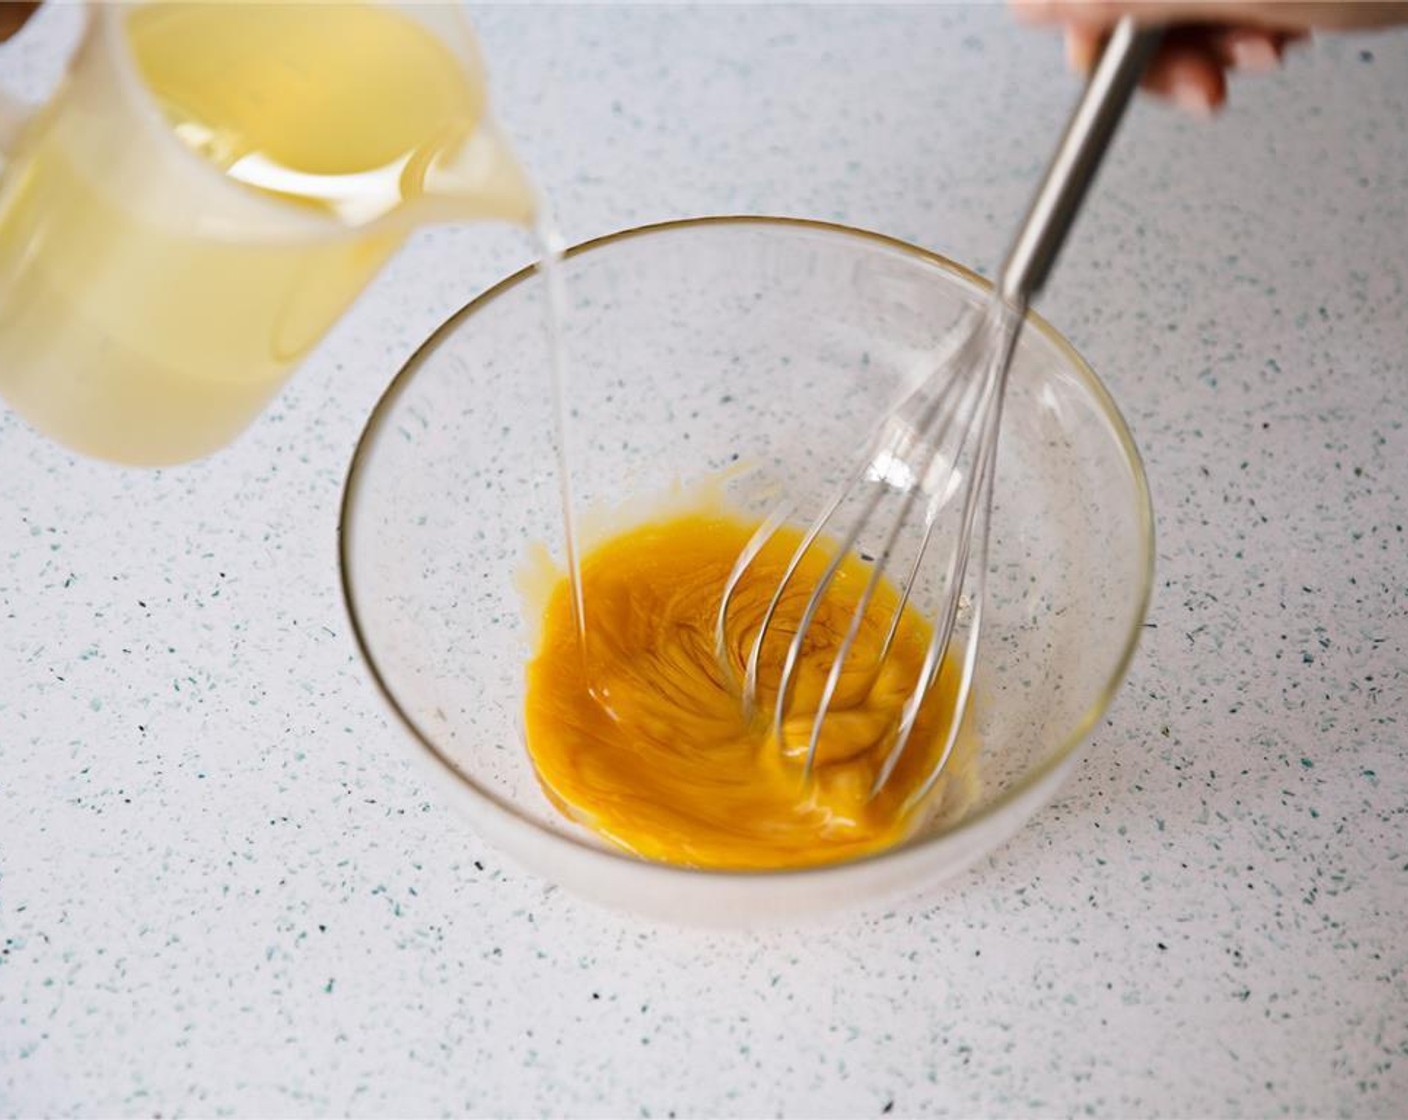 step 4 Slowly add Vegetable Oil (2 cups) to eggs and dijon mustard, whisking constantly.